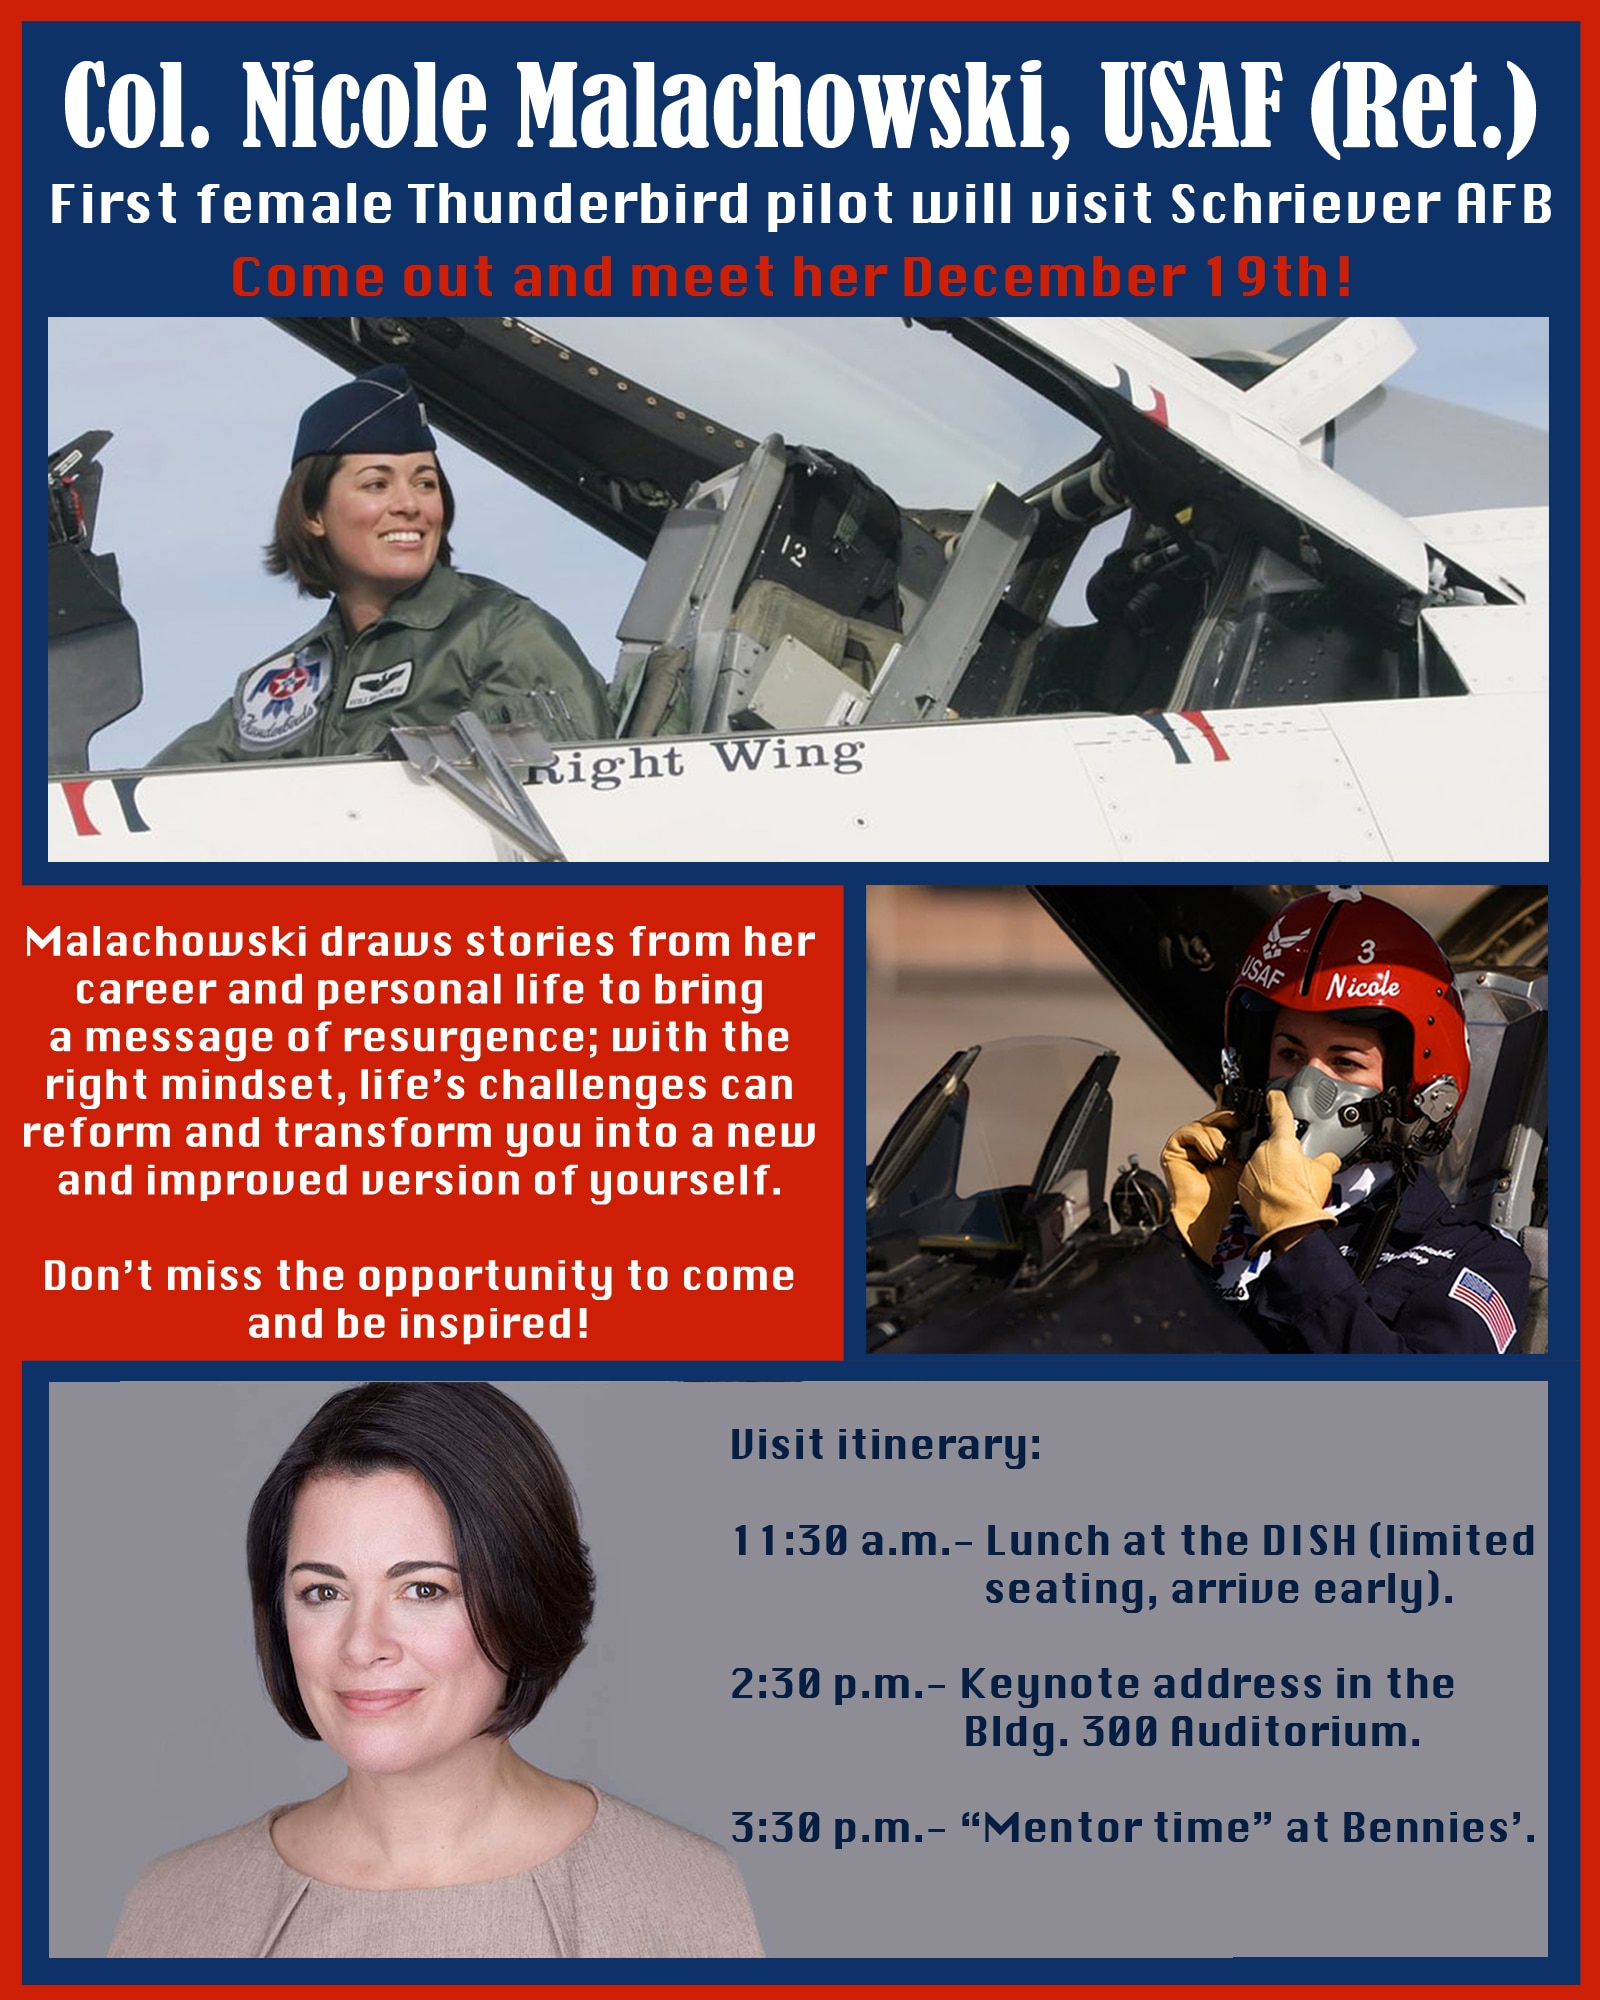 Retired Col. Nicole "FiFi" Malachowski, will visit Schriever Air Force Base, Dec. 19. Malachowski's visit will include a lunch at the DISH dining facility and a keynote address at 2:30 p.m. in the Bldg. 300 Auditorium. This presentation will be streamed live to the base through the Schriever AFB Facebook page. Malachowski will conclude her visit with "Mentor time" at 3:30 p.m. at Bennies'. (U.S. Air Force graphic by 2nd Lt. Idalí Beltré Acevedo)